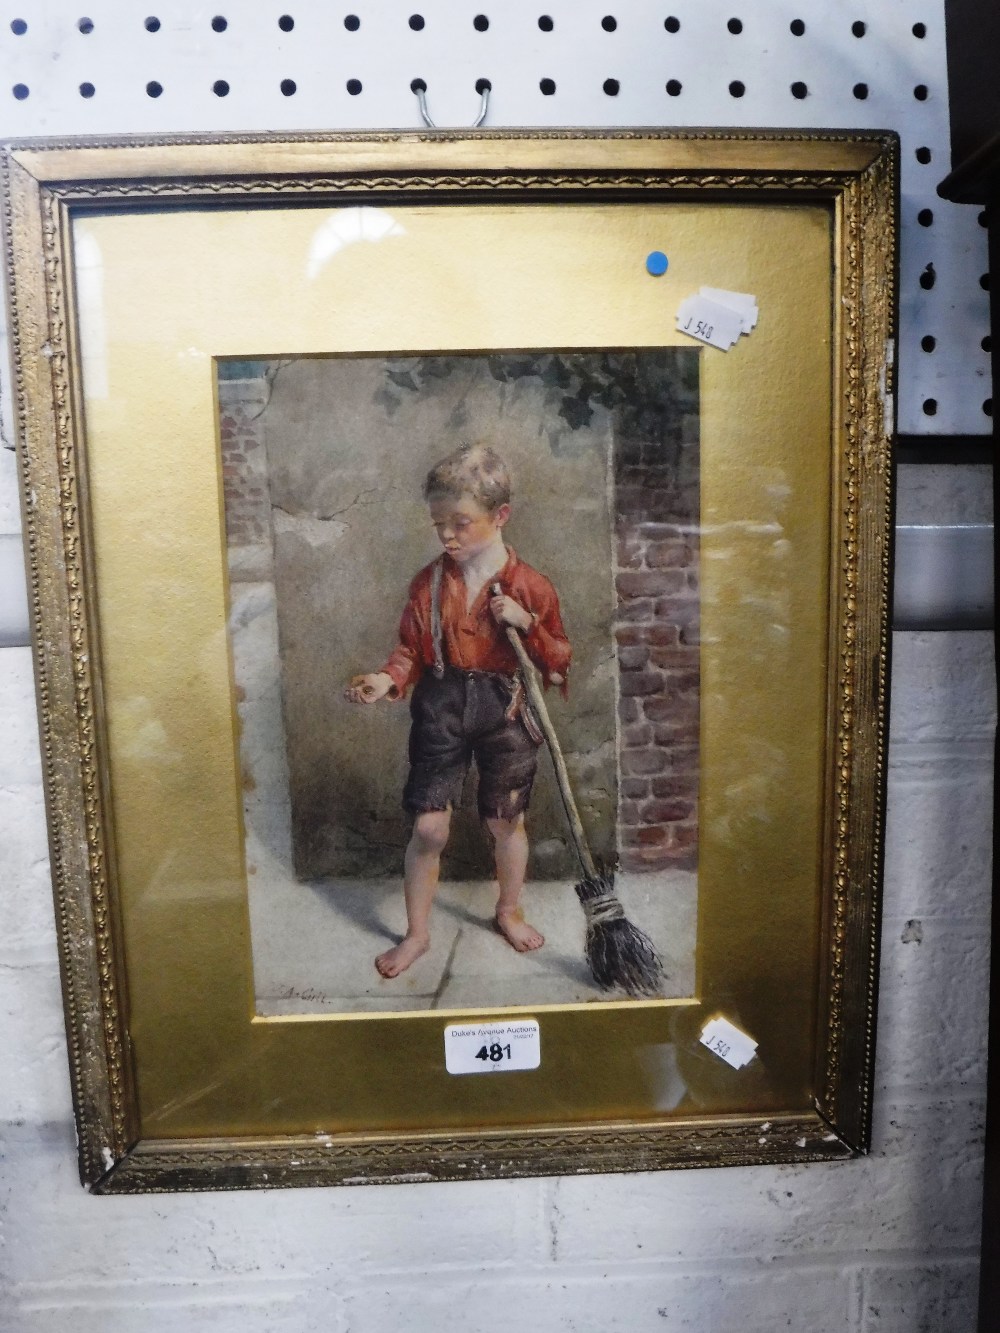 J A GILL, 19th century: Vagrant Boy, indistinctly signed lower left, watercolour